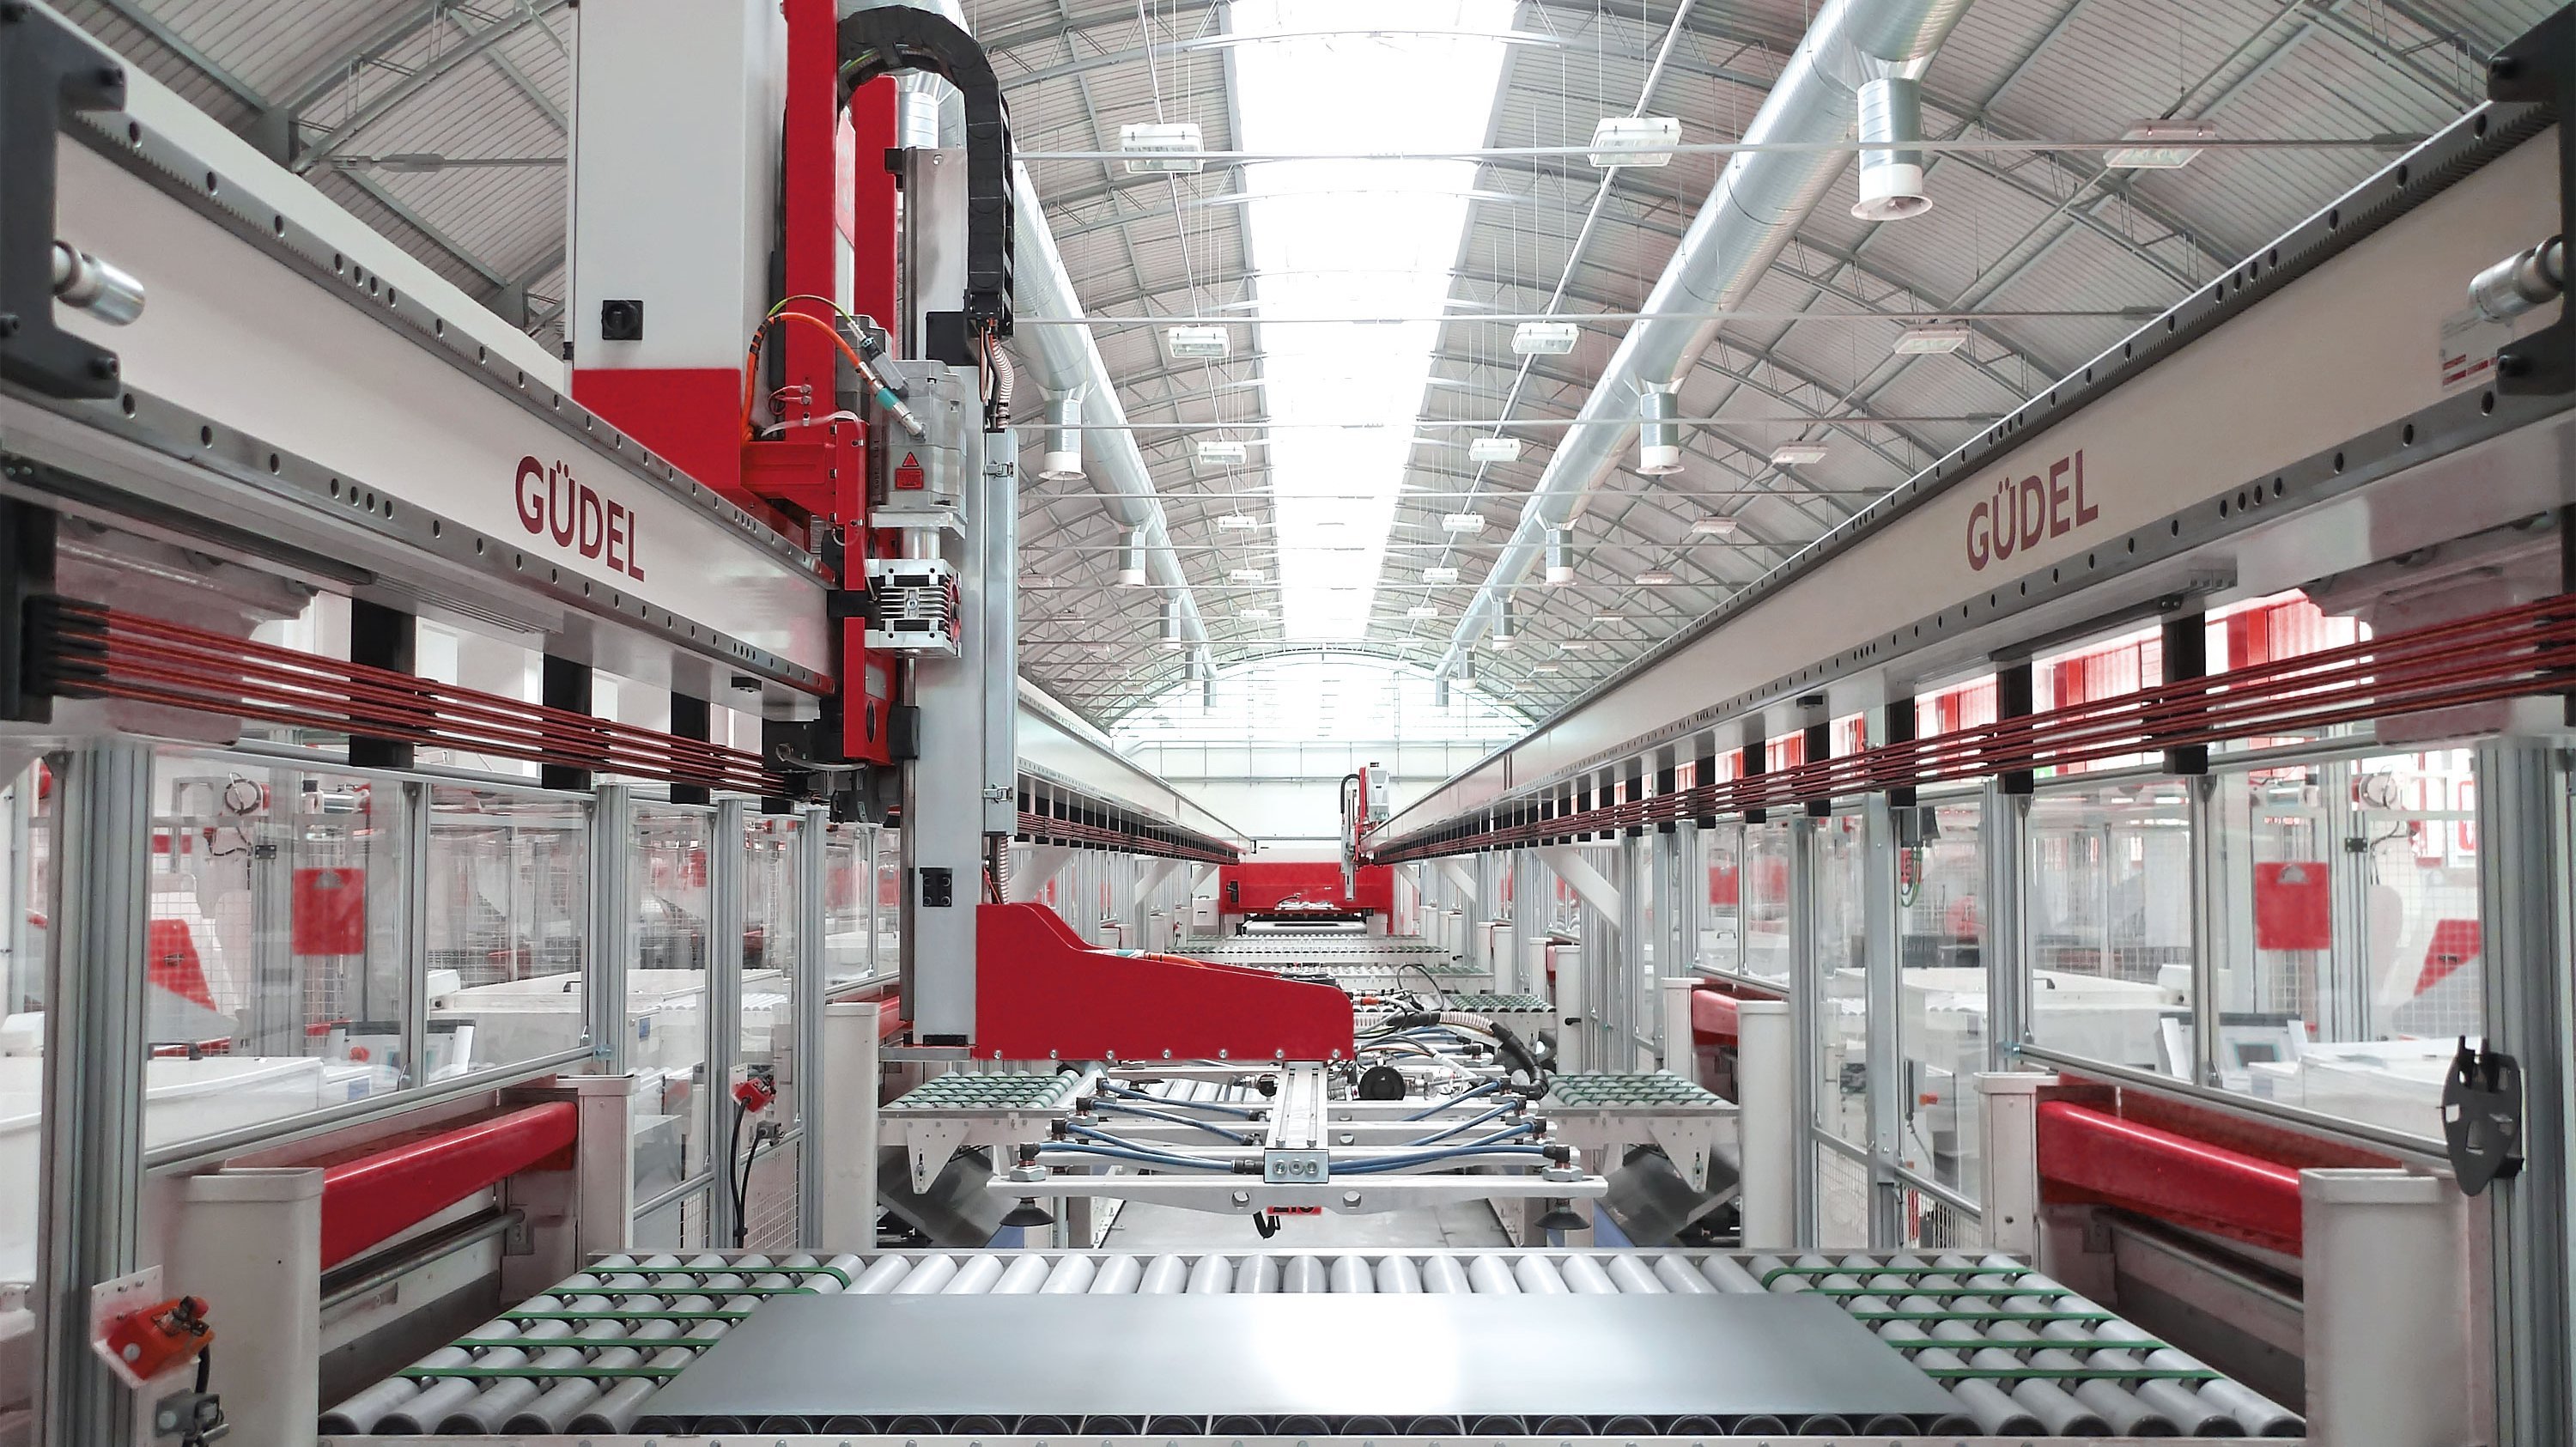 A clean and bright inside of a factory with several machines lined up left and right. On two white rails at the upper half of the picture Güdel is written in red large letters. In the foreground, a sheet of metal lays on a conveyor belt.